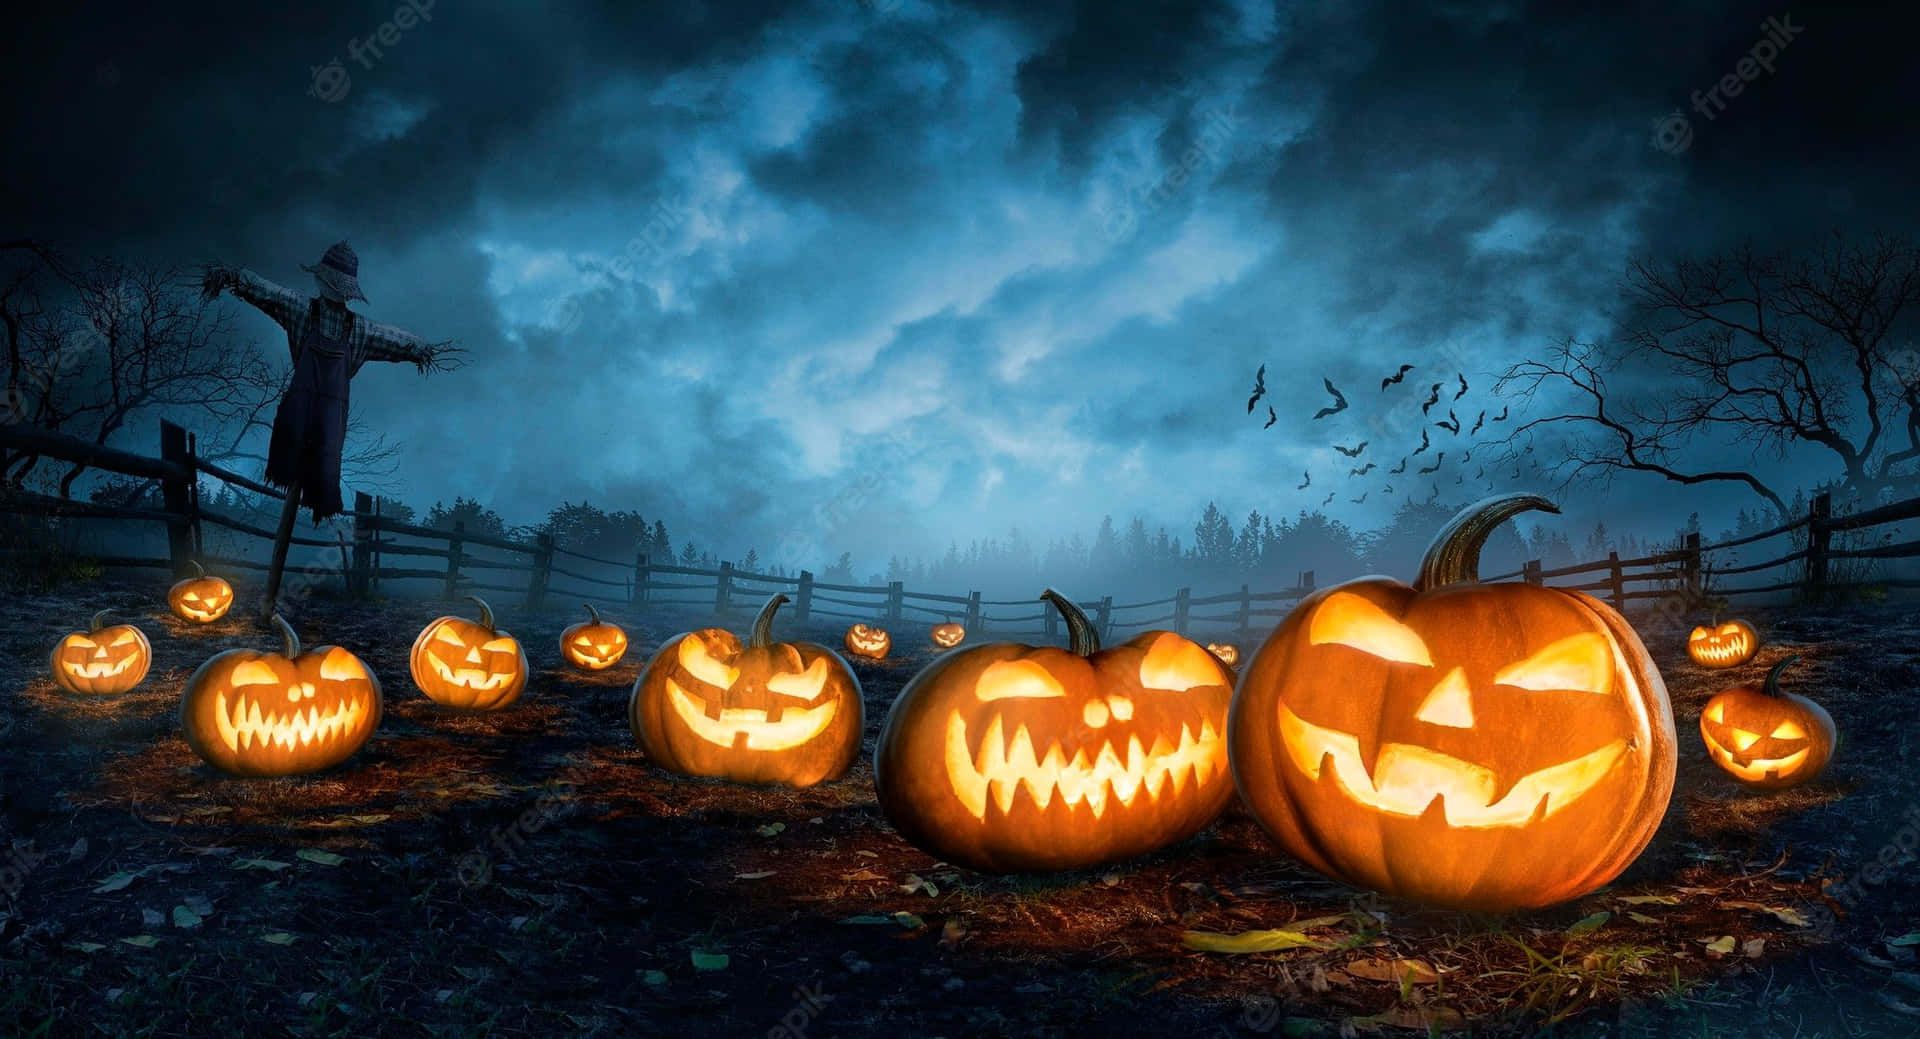 Celebrate Halloween with Spooky and Creepy Environments